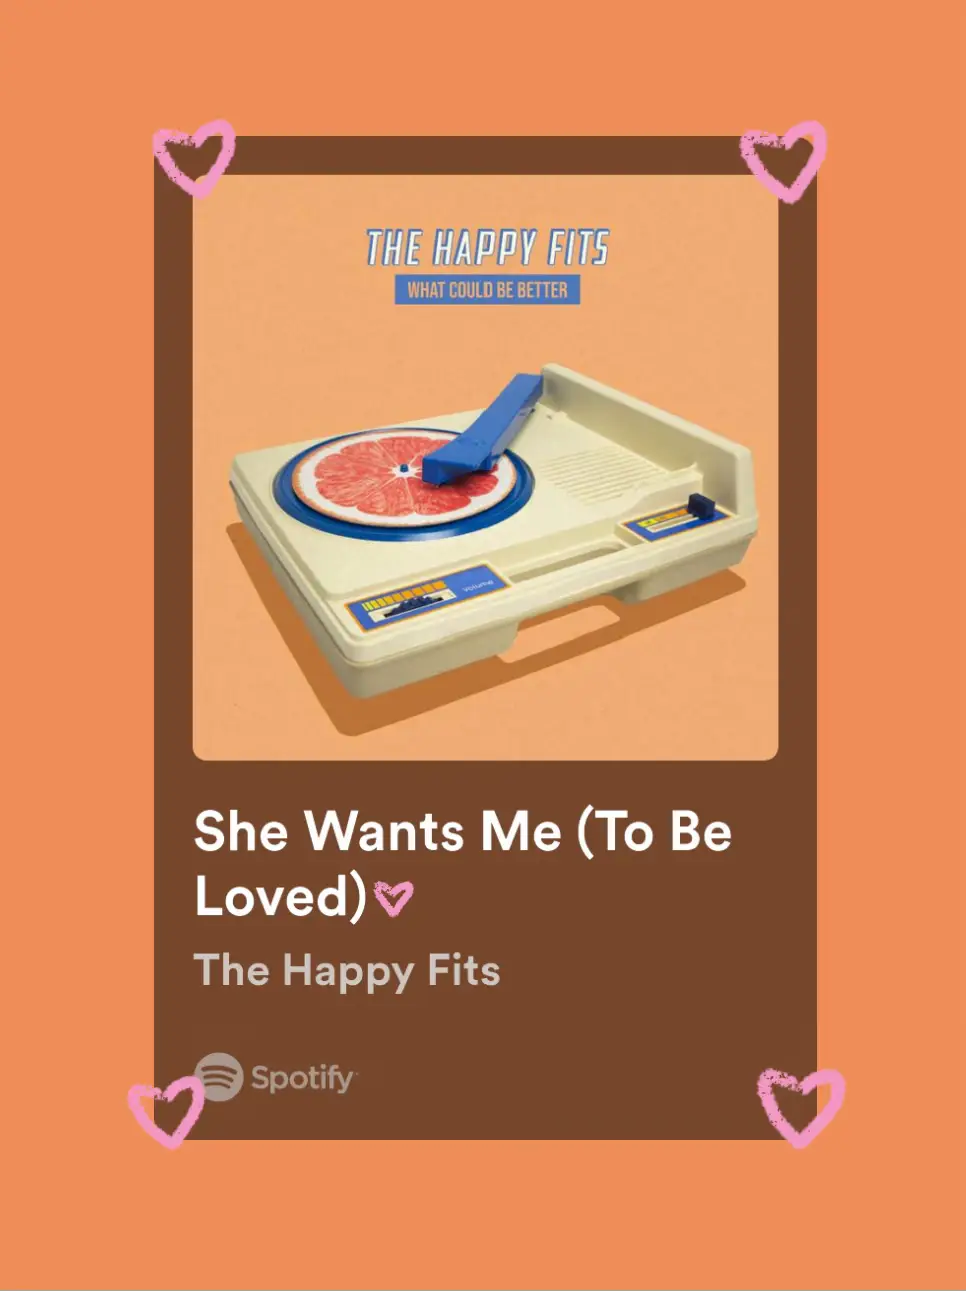  A Spotify ad for a song by The Happy Fits.